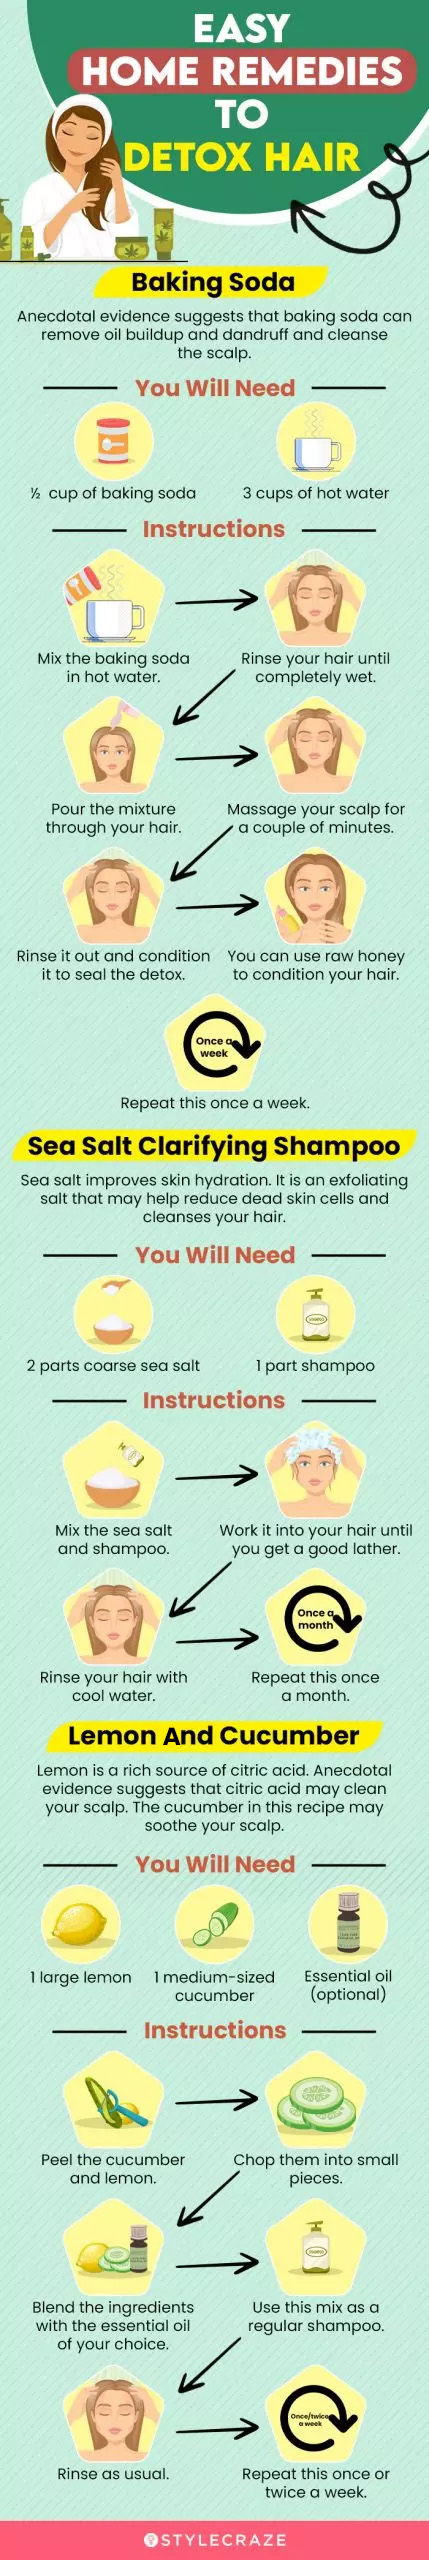 easy home remedies to detox hair (infographic)